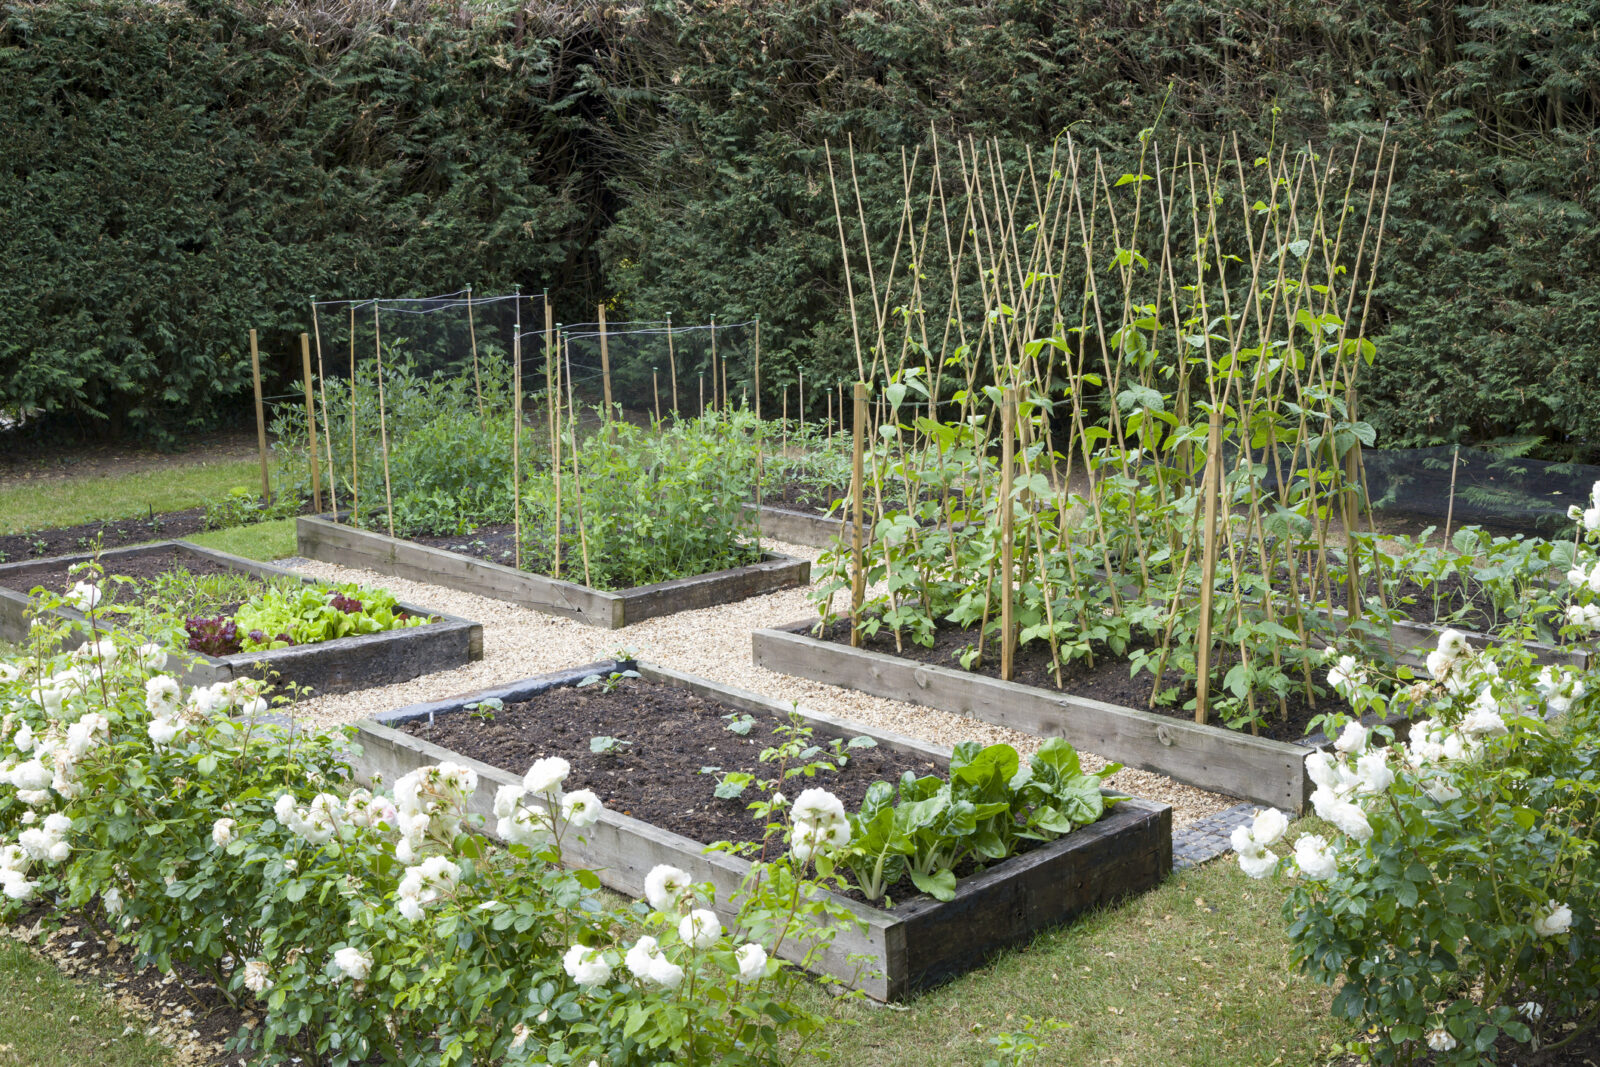 A picture of a raised bed vegetable garden in a patch of lawn, to illustrate an LCA post on converting your lawn.